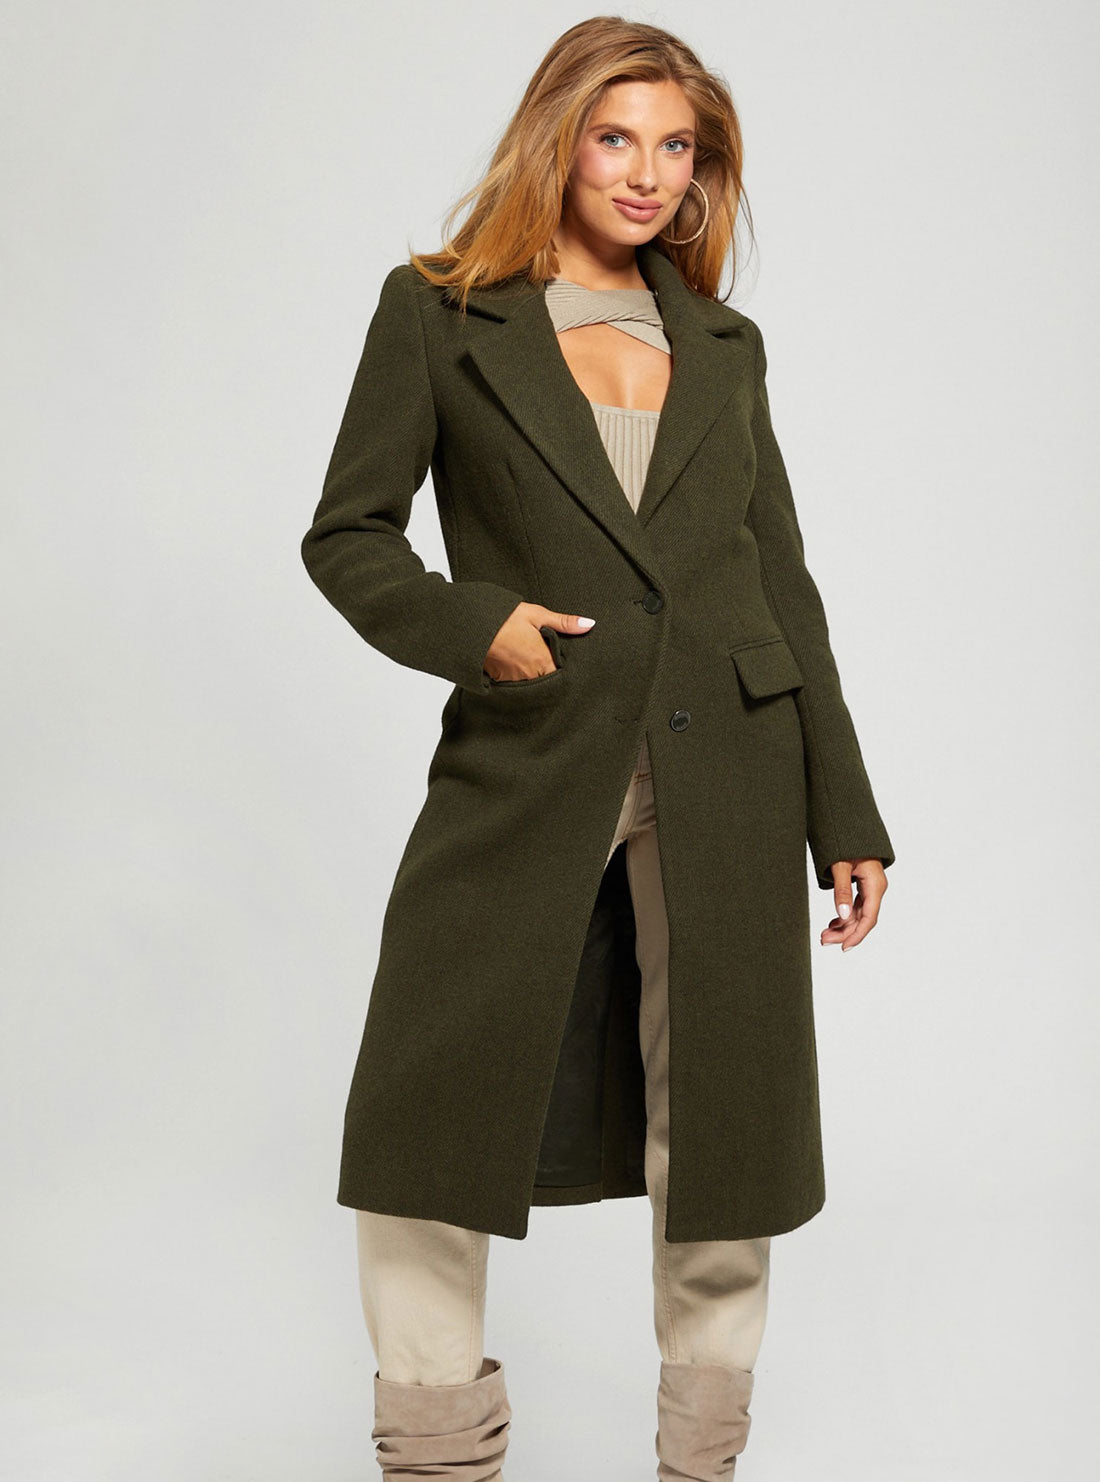 GUESS Women's Green Multi Laurence Coat W2BL53WEWY0 Pose View